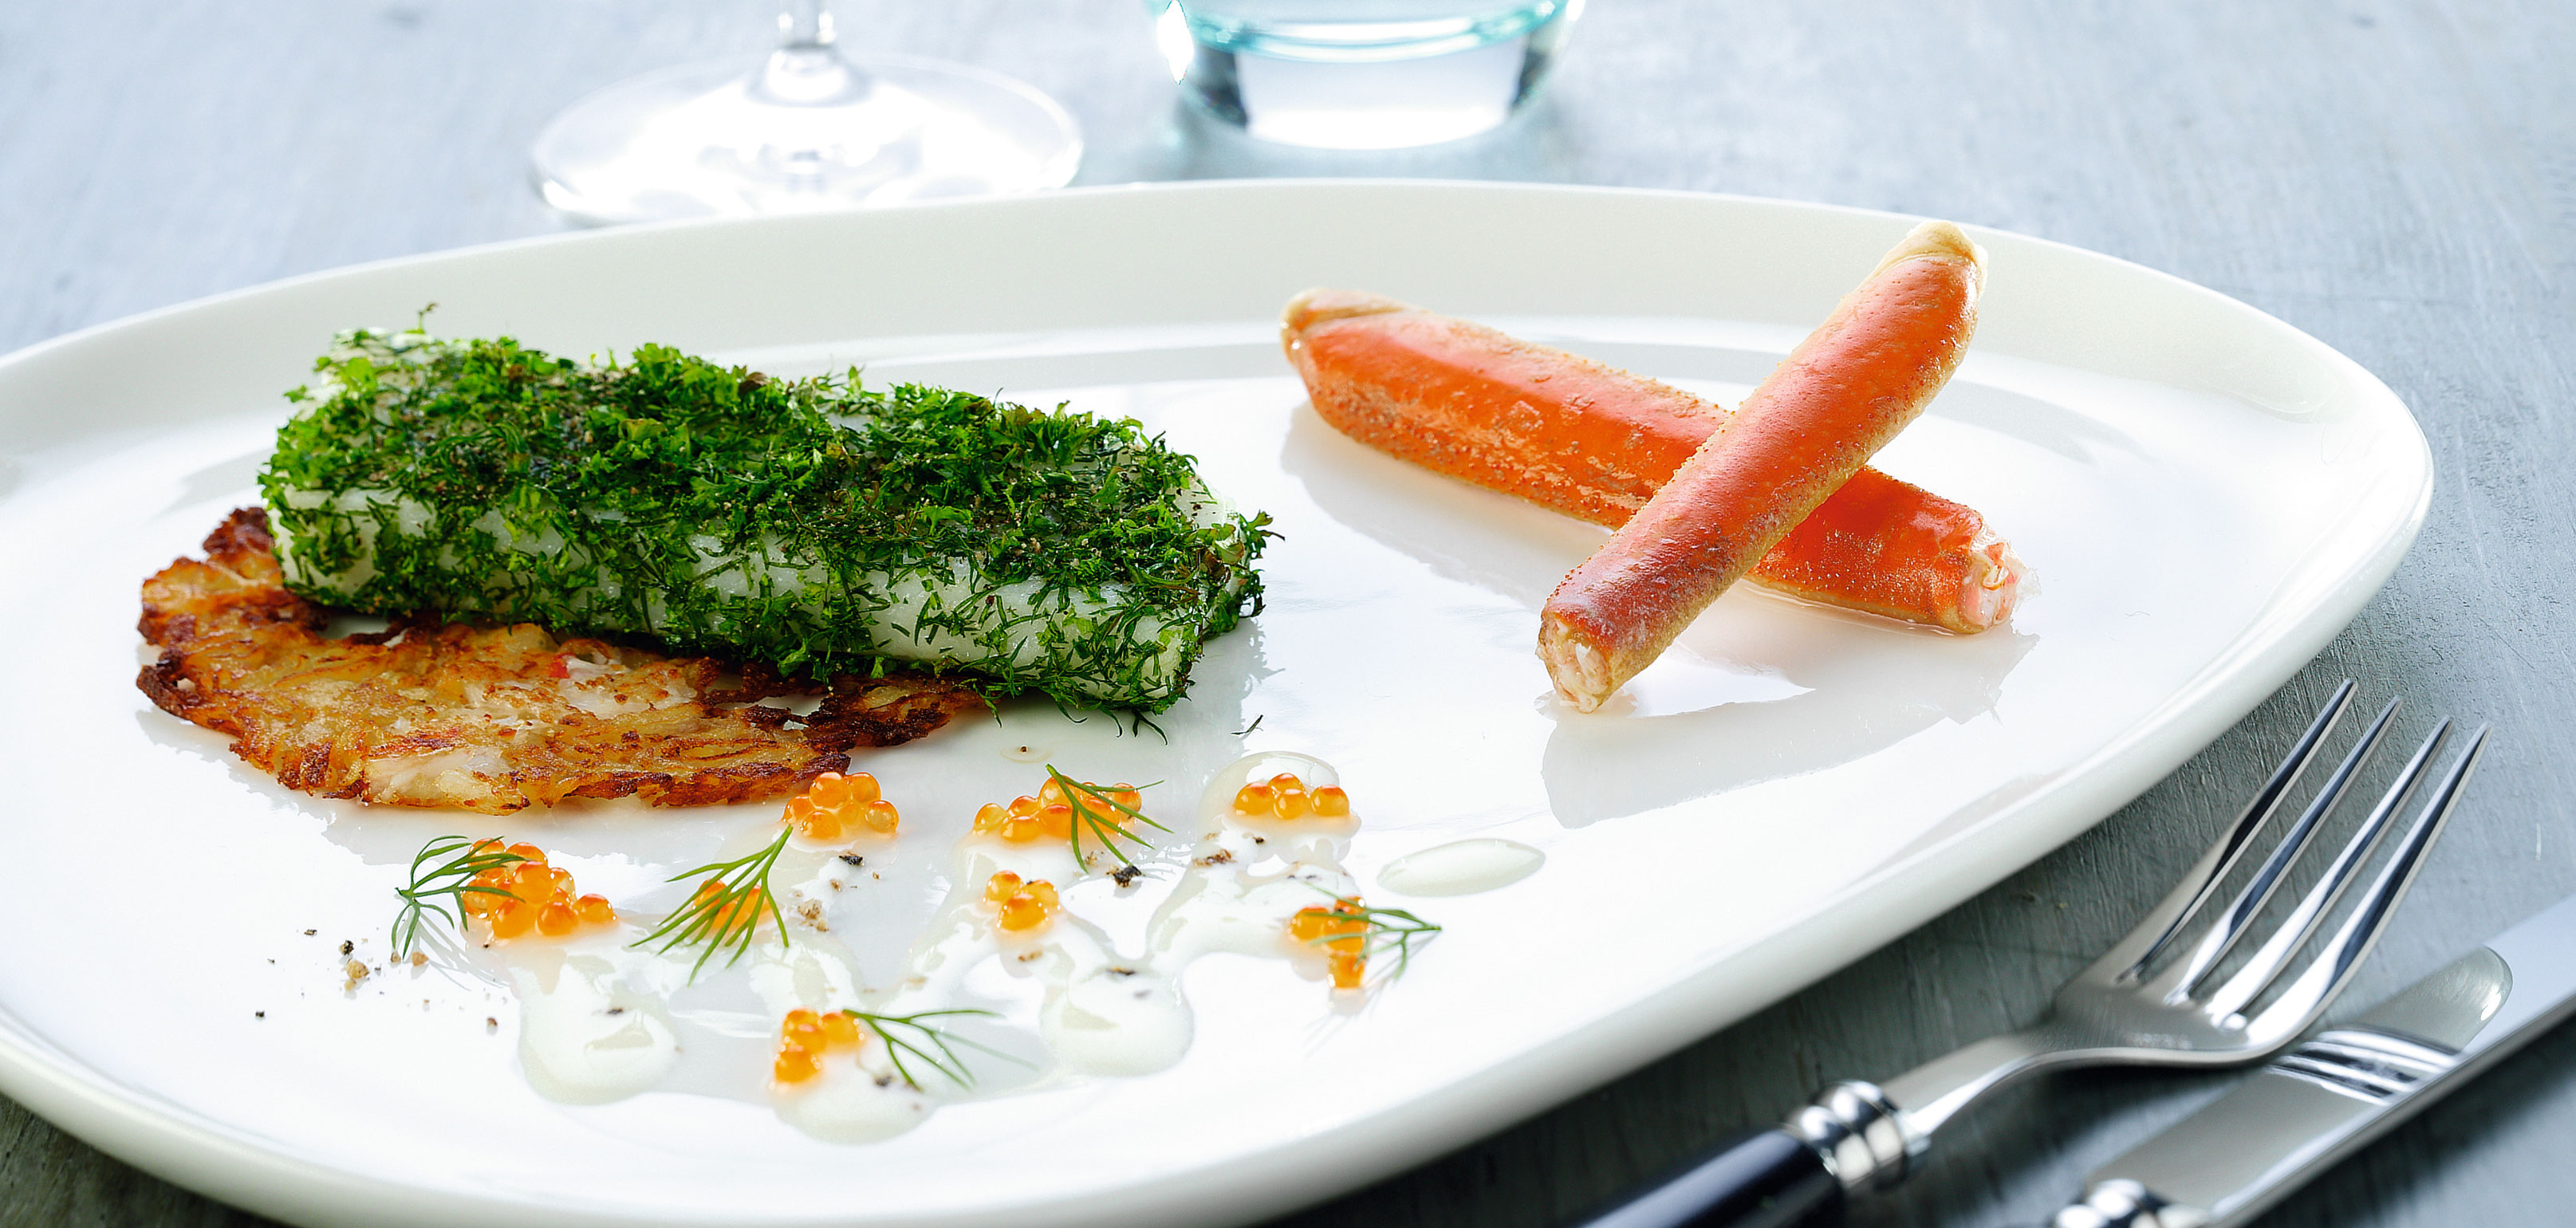 Herb-baked halibut fillet potatoes snow crabs and creamed salmon caviar - Greenland